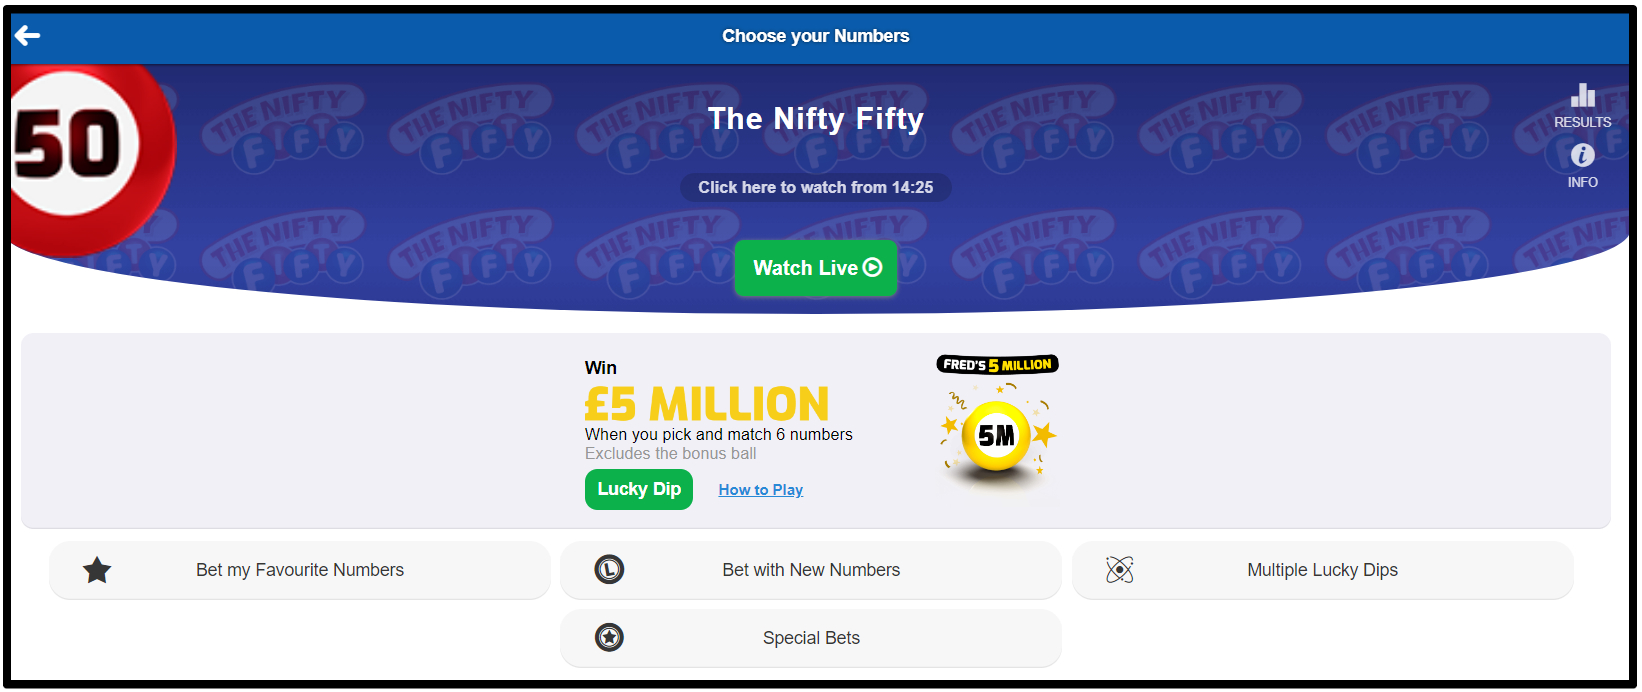 Step 1: How to play the Nifty Fifty lottery games